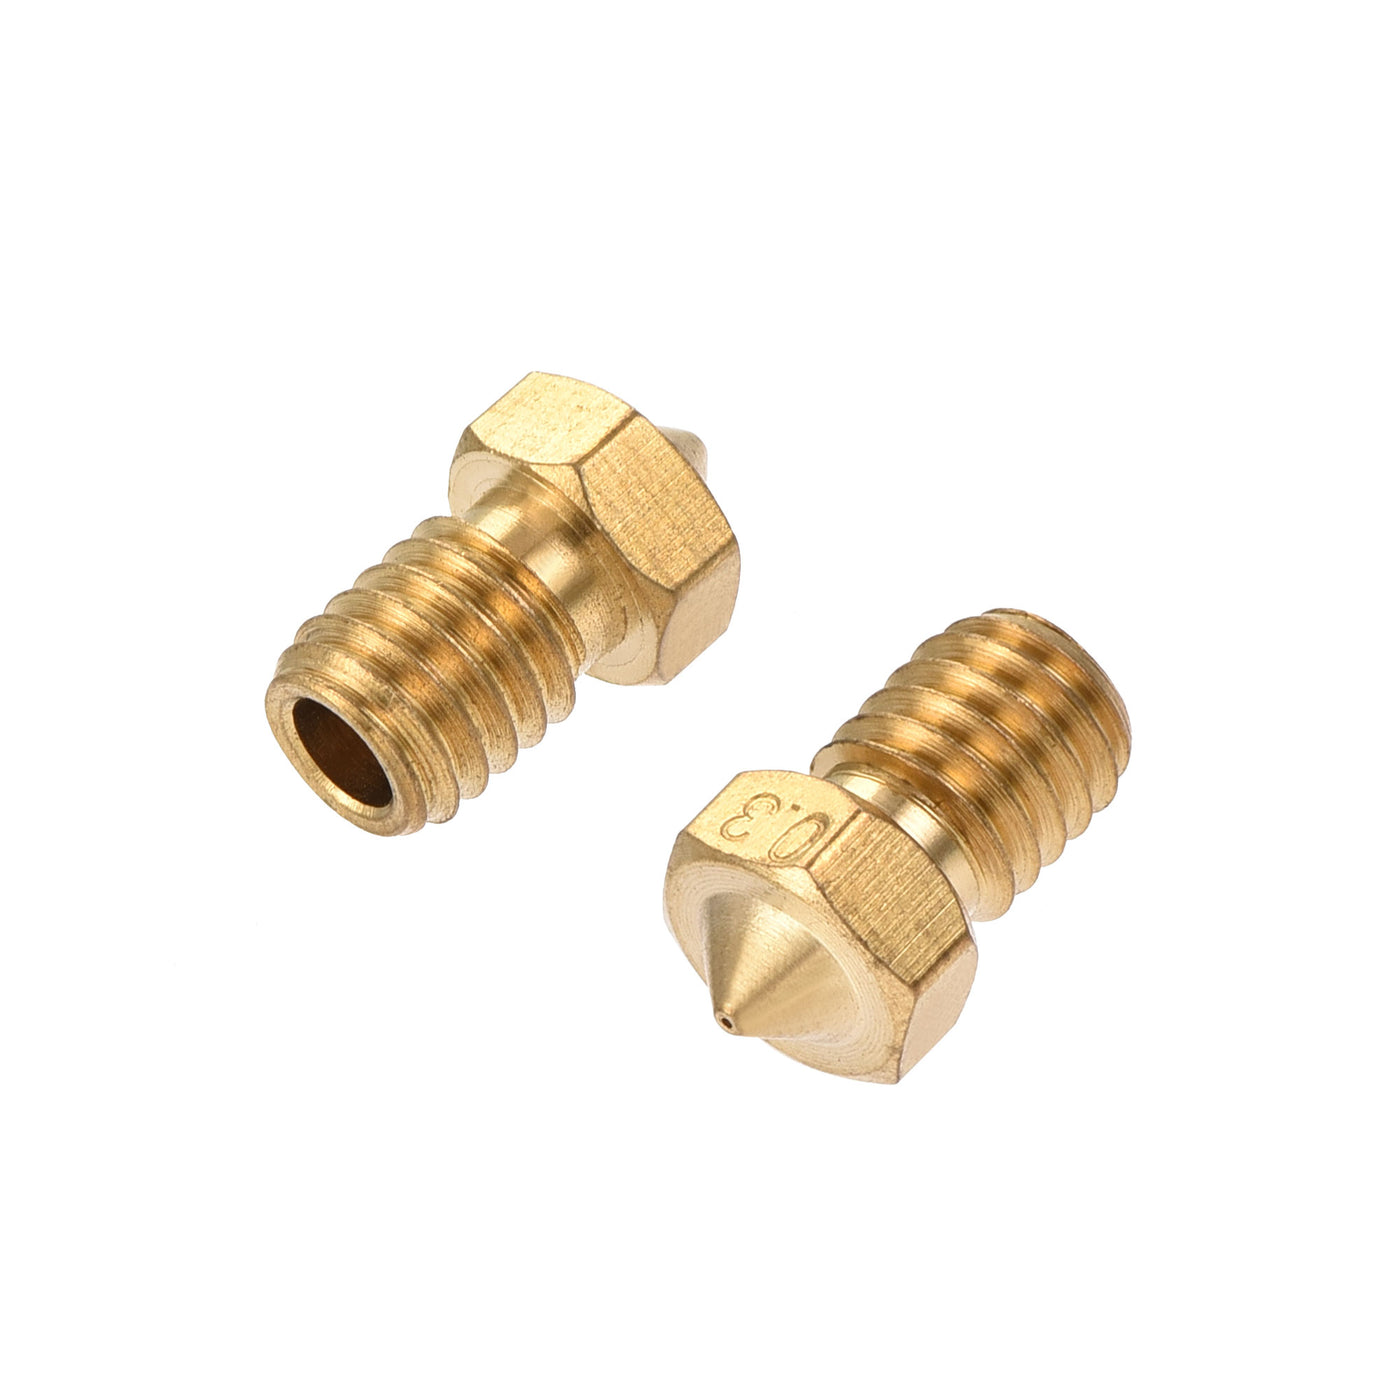 uxcell Uxcell 0.3mm 3D Printer Nozzle, 20pcs M6 Thread for V5 V6 3mm Extruder Print, Brass